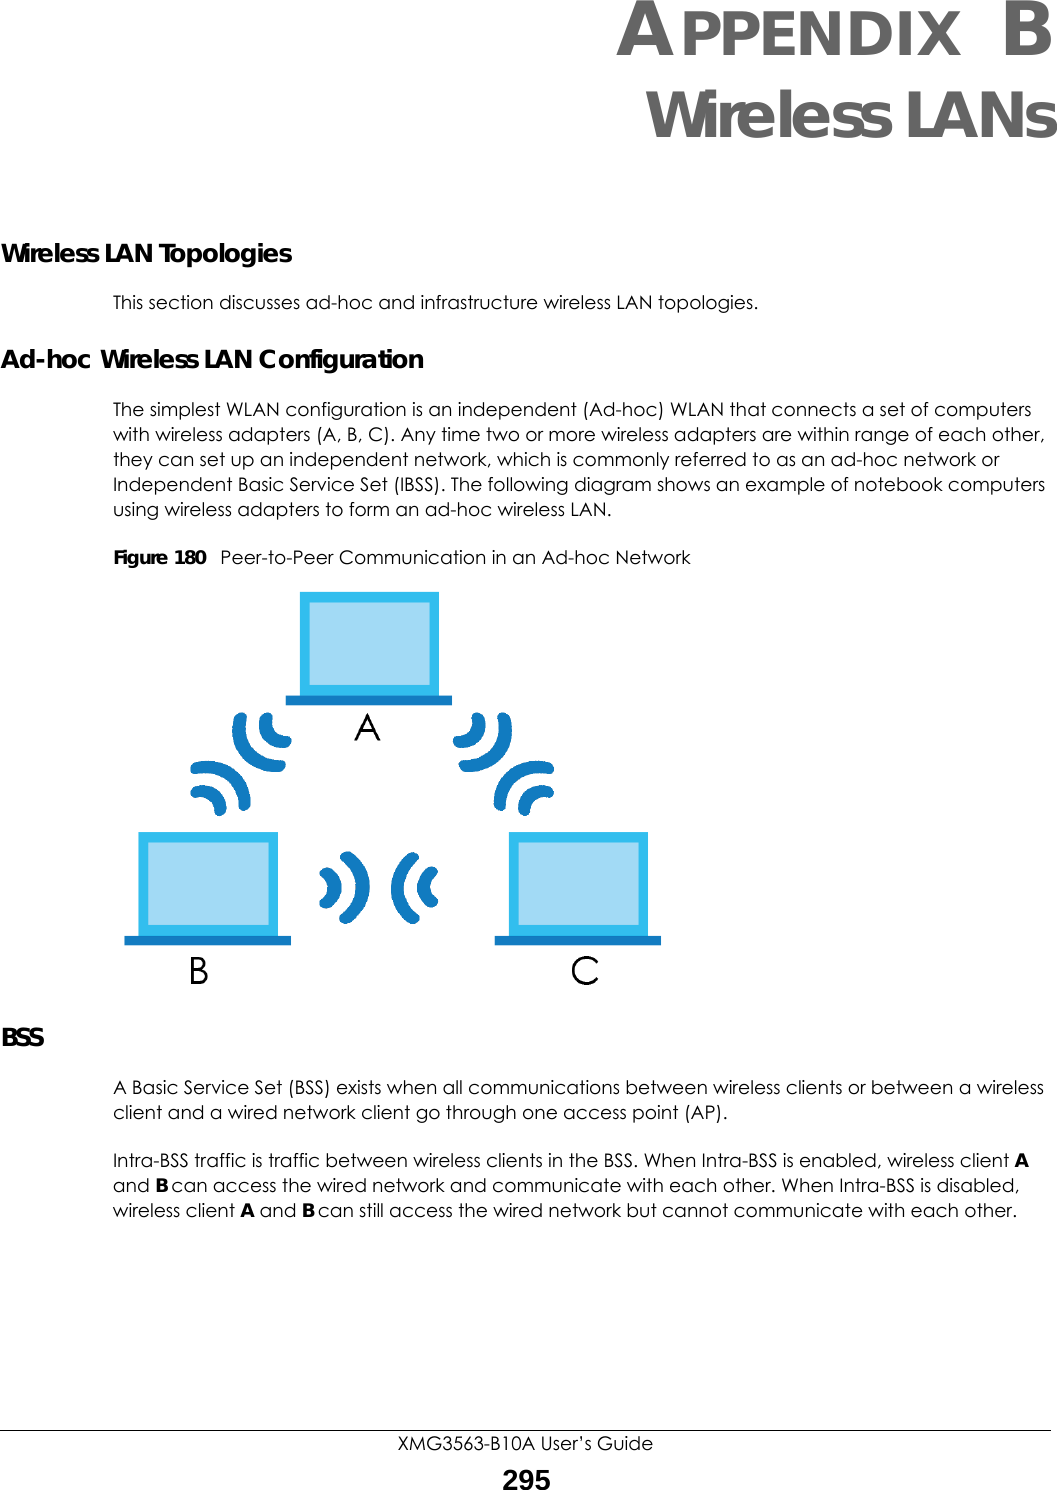 XMG3563-B10A User’s Guide295APPENDIX BWireless LANsWireless LAN TopologiesThis section discusses ad-hoc and infrastructure wireless LAN topologies.Ad-hoc Wireless LAN ConfigurationThe simplest WLAN configuration is an independent (Ad-hoc) WLAN that connects a set of computers with wireless adapters (A, B, C). Any time two or more wireless adapters are within range of each other, they can set up an independent network, which is commonly referred to as an ad-hoc network or Independent Basic Service Set (IBSS). The following diagram shows an example of notebook computers using wireless adapters to form an ad-hoc wireless LAN. Figure 180   Peer-to-Peer Communication in an Ad-hoc NetworkBSSA Basic Service Set (BSS) exists when all communications between wireless clients or between a wireless client and a wired network client go through one access point (AP). Intra-BSS traffic is traffic between wireless clients in the BSS. When Intra-BSS is enabled, wireless client A and B can access the wired network and communicate with each other. When Intra-BSS is disabled, wireless client A and B can still access the wired network but cannot communicate with each other.